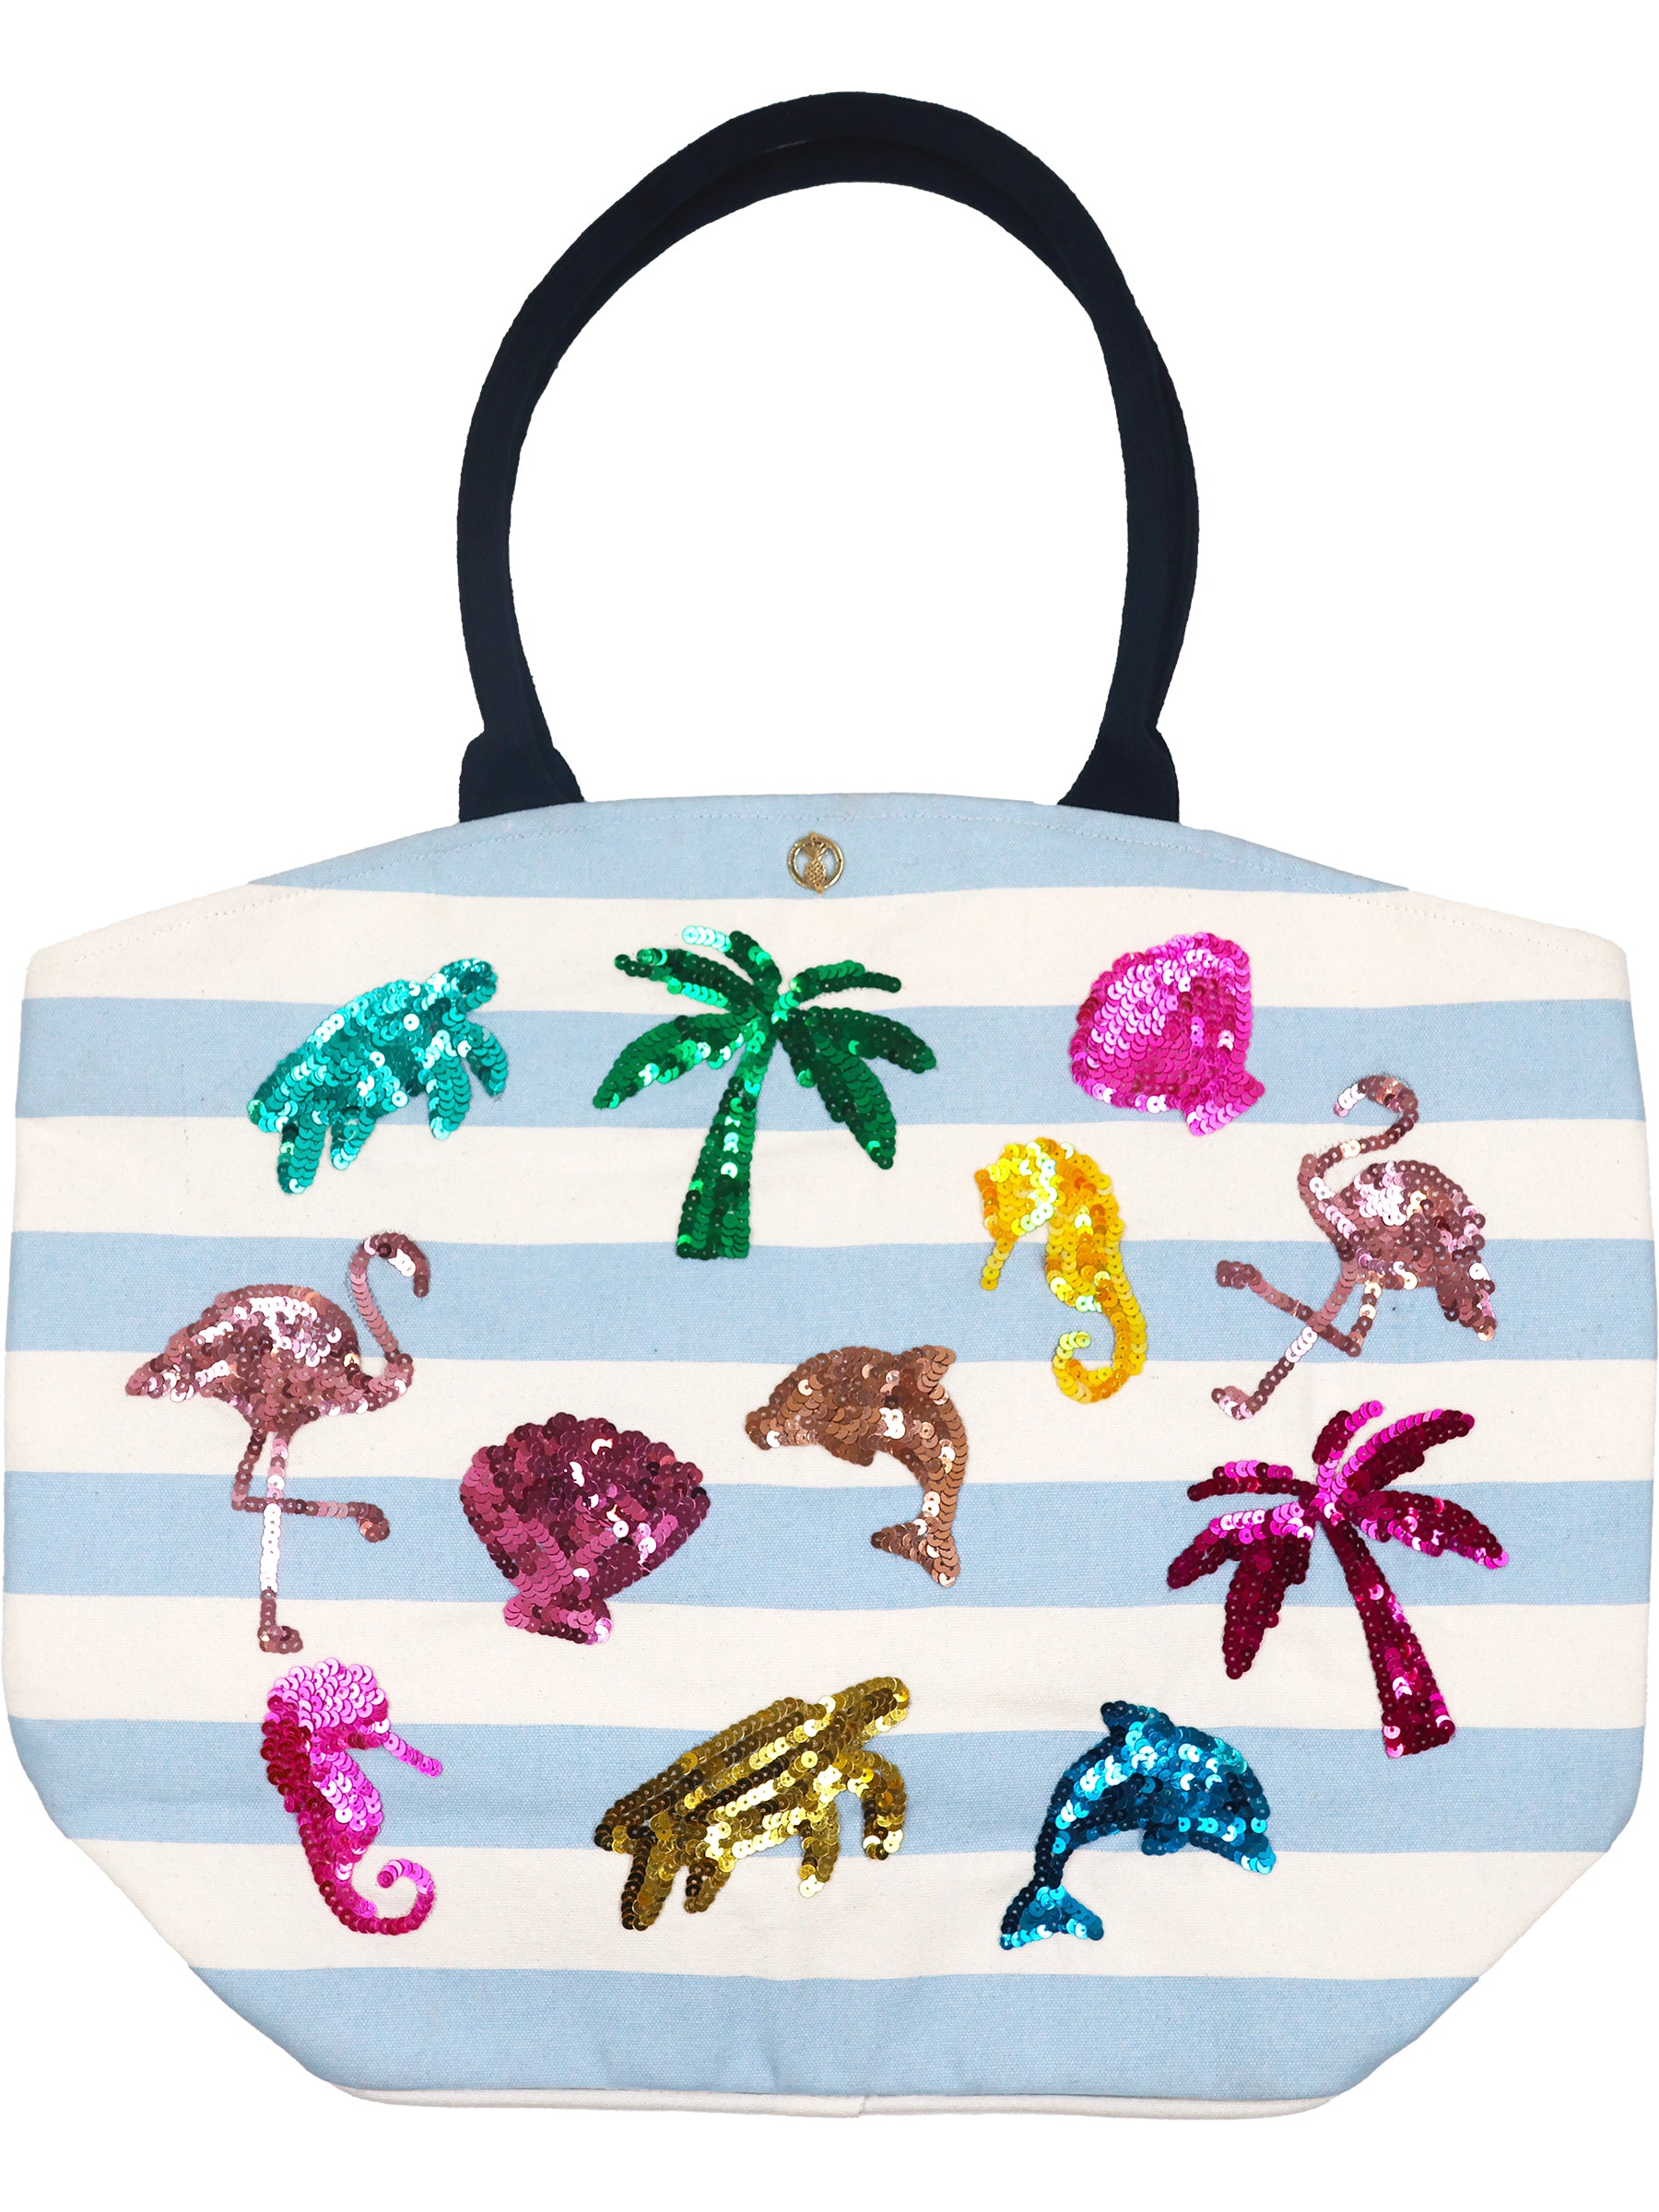 Embroidered Sequin Totes by Simply Southern